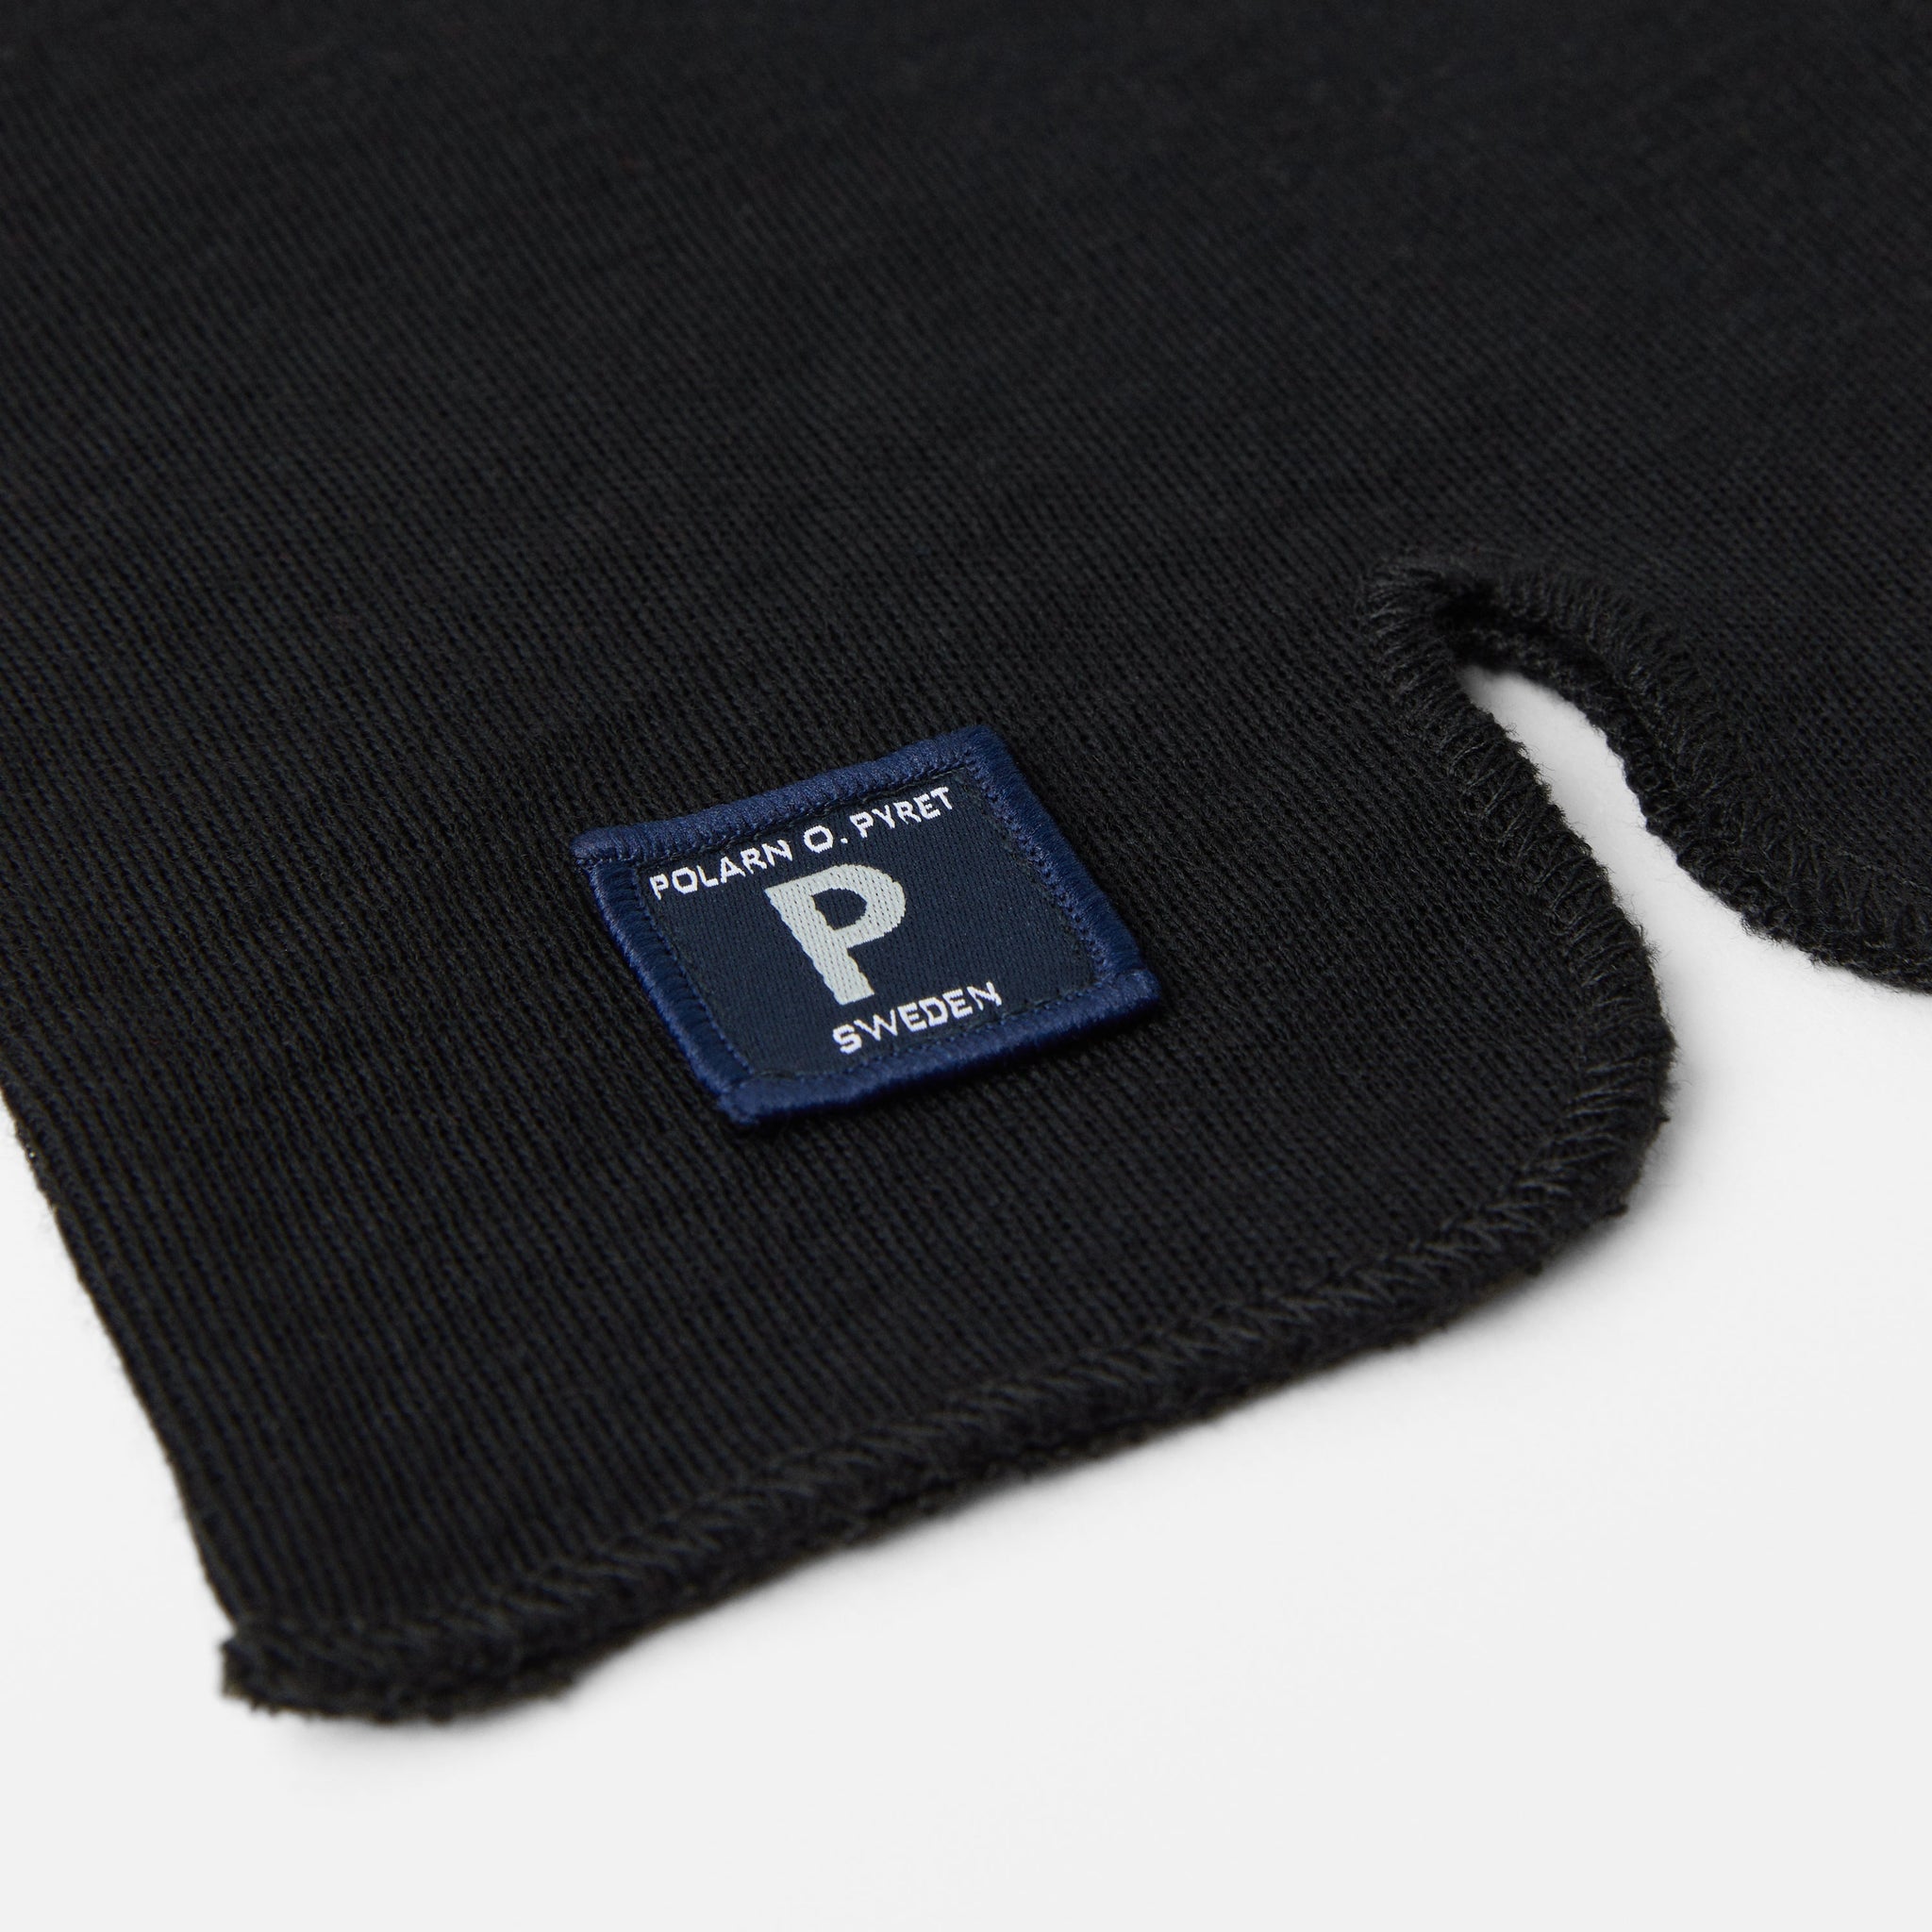 Merino Wool Kids Black Balaclava from the Polarn O. Pyret kidswear collection. Quality kids clothing made to last.